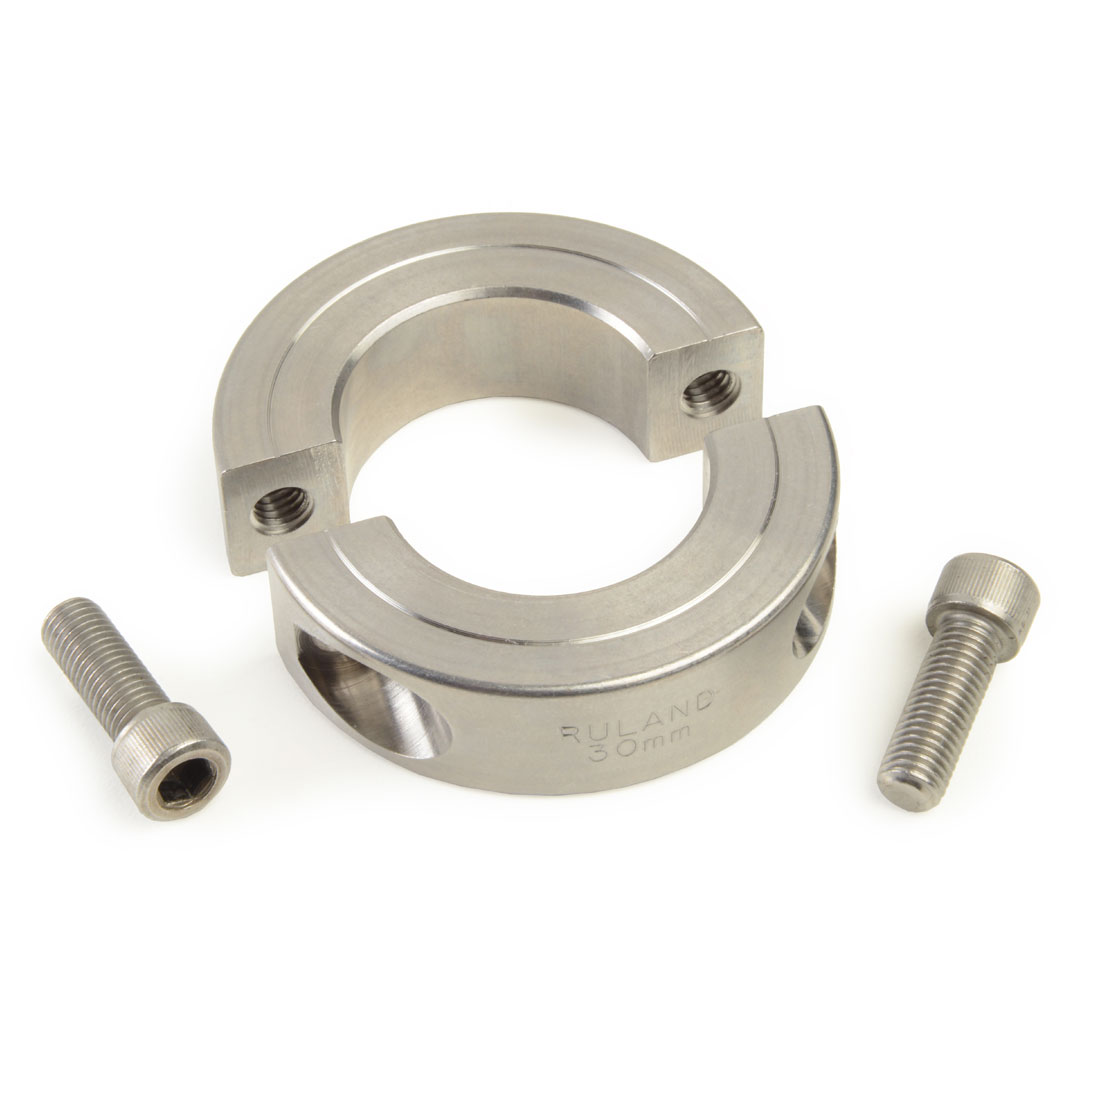 RULAND MANUFACTURING MSP-16E-F Shaft Collar,Clamp,2Pc,1 In,Steel 